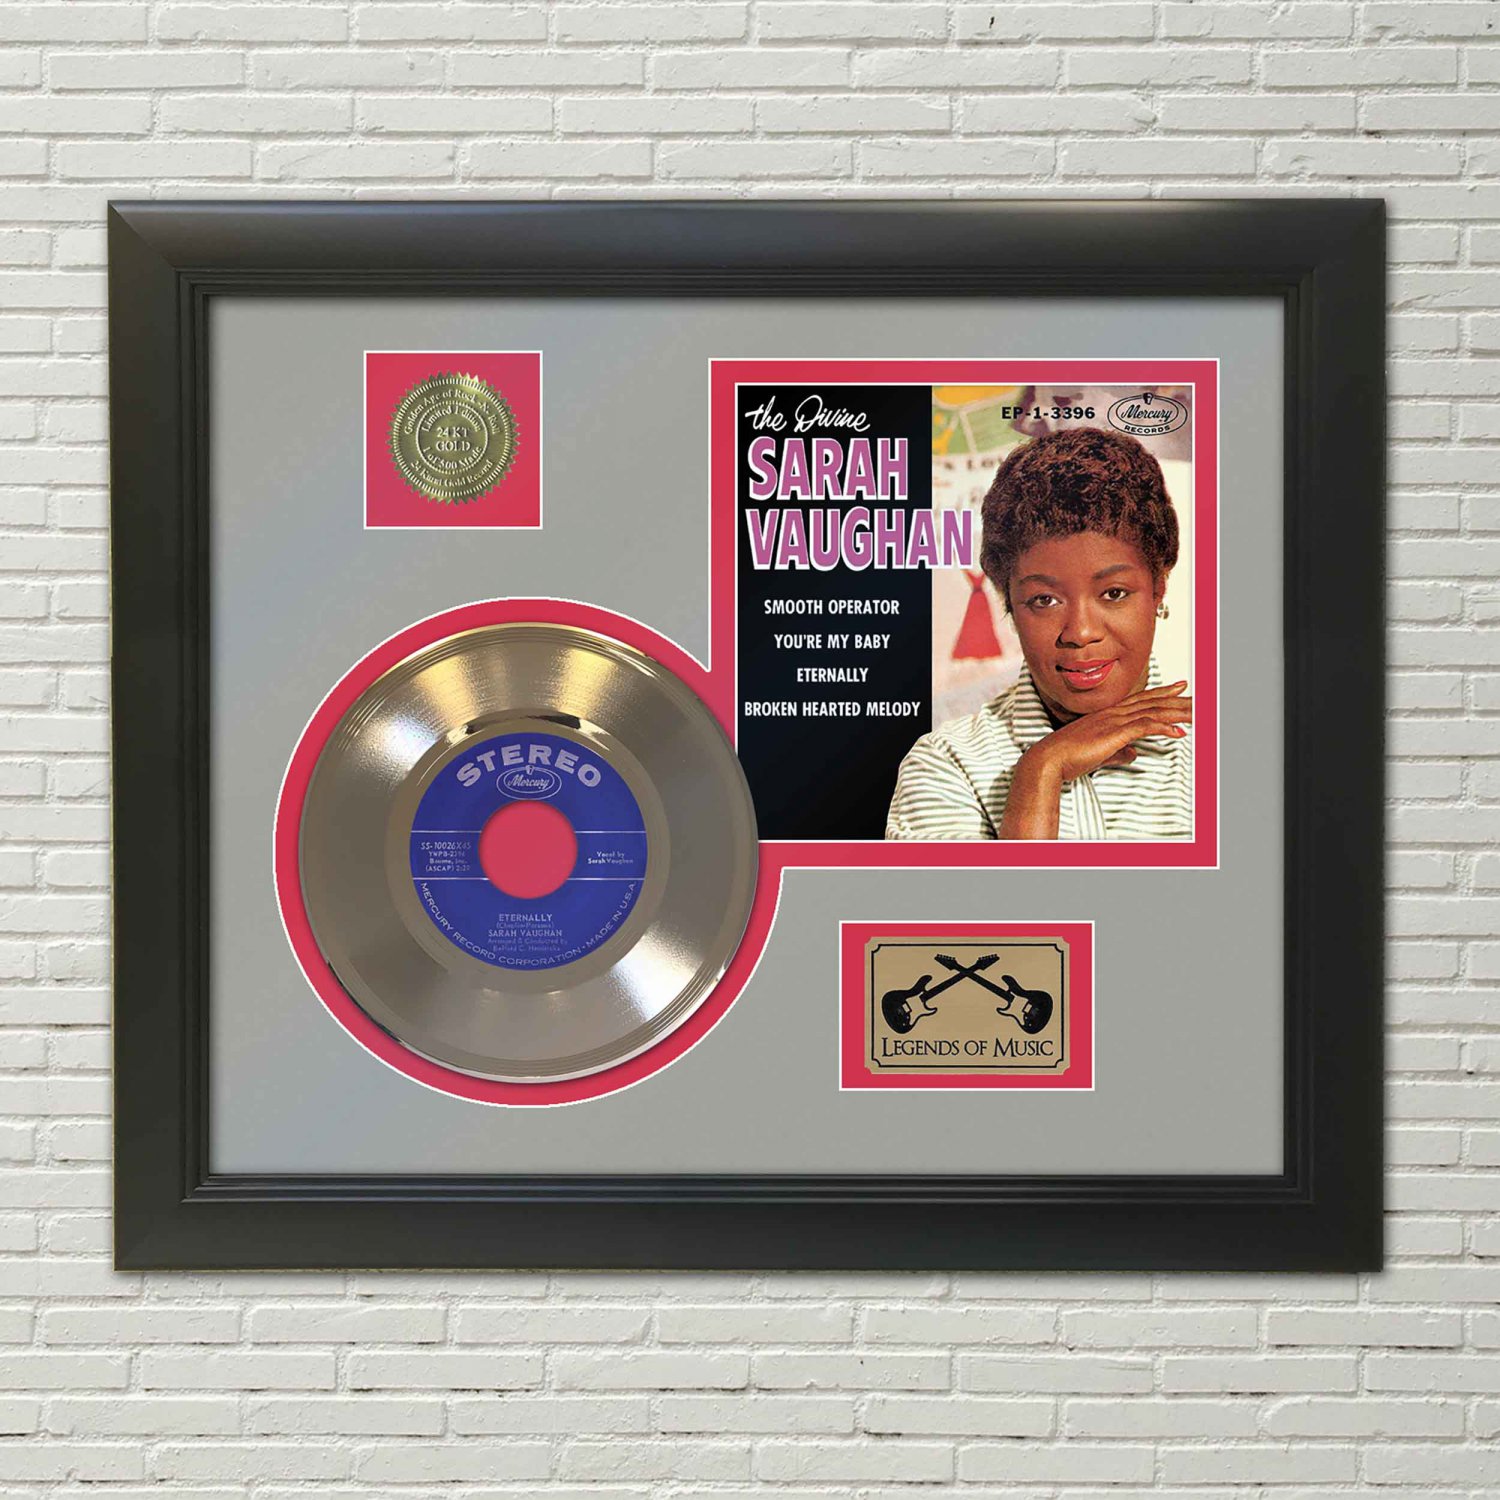 SARAH VAUGHAN "Eternally"  Framed Picture Sleeve Gold 45 Record Display